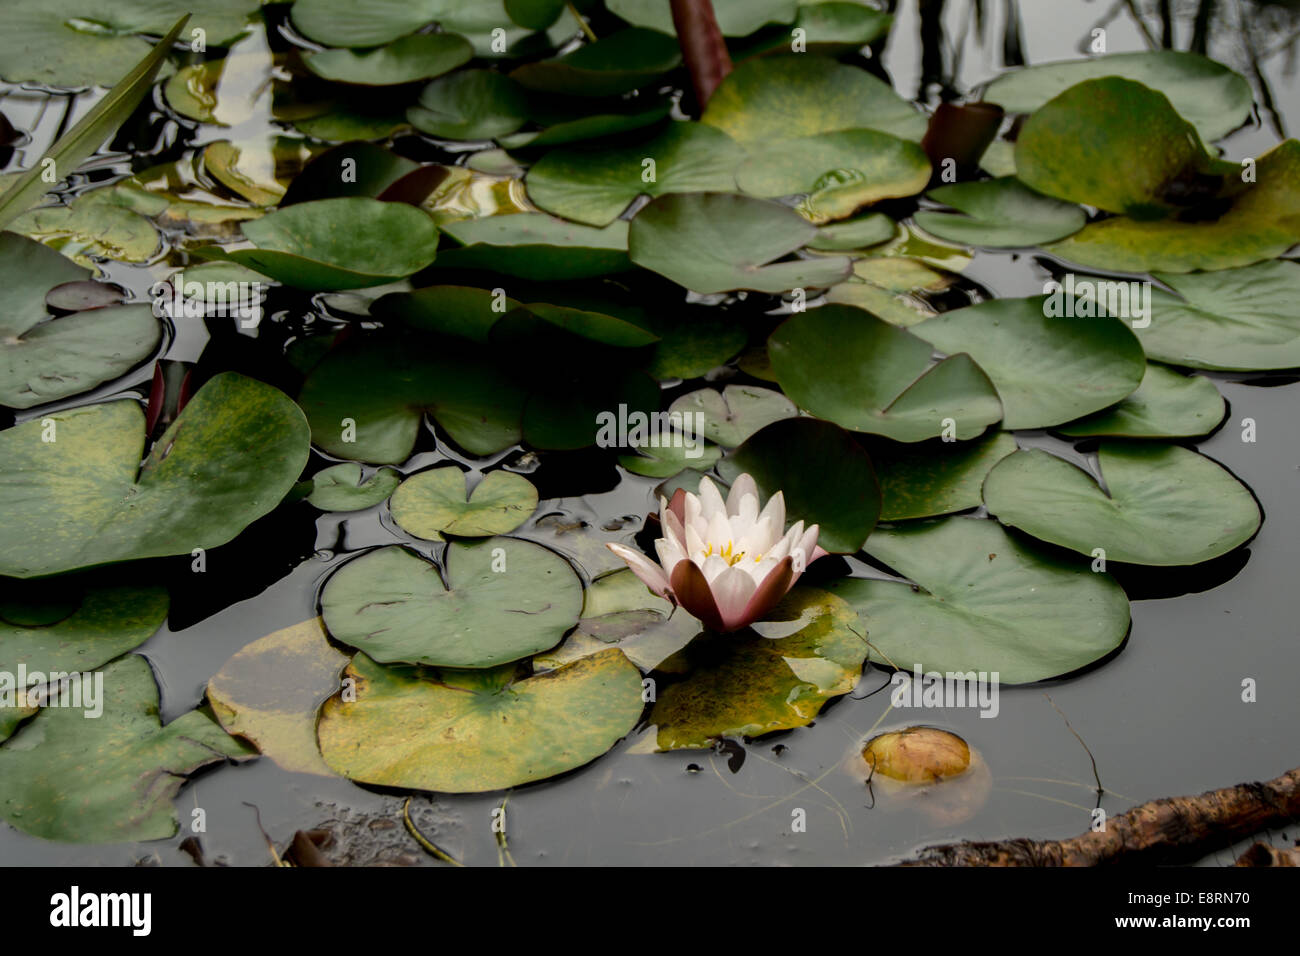 Water lily plant Stock Photo